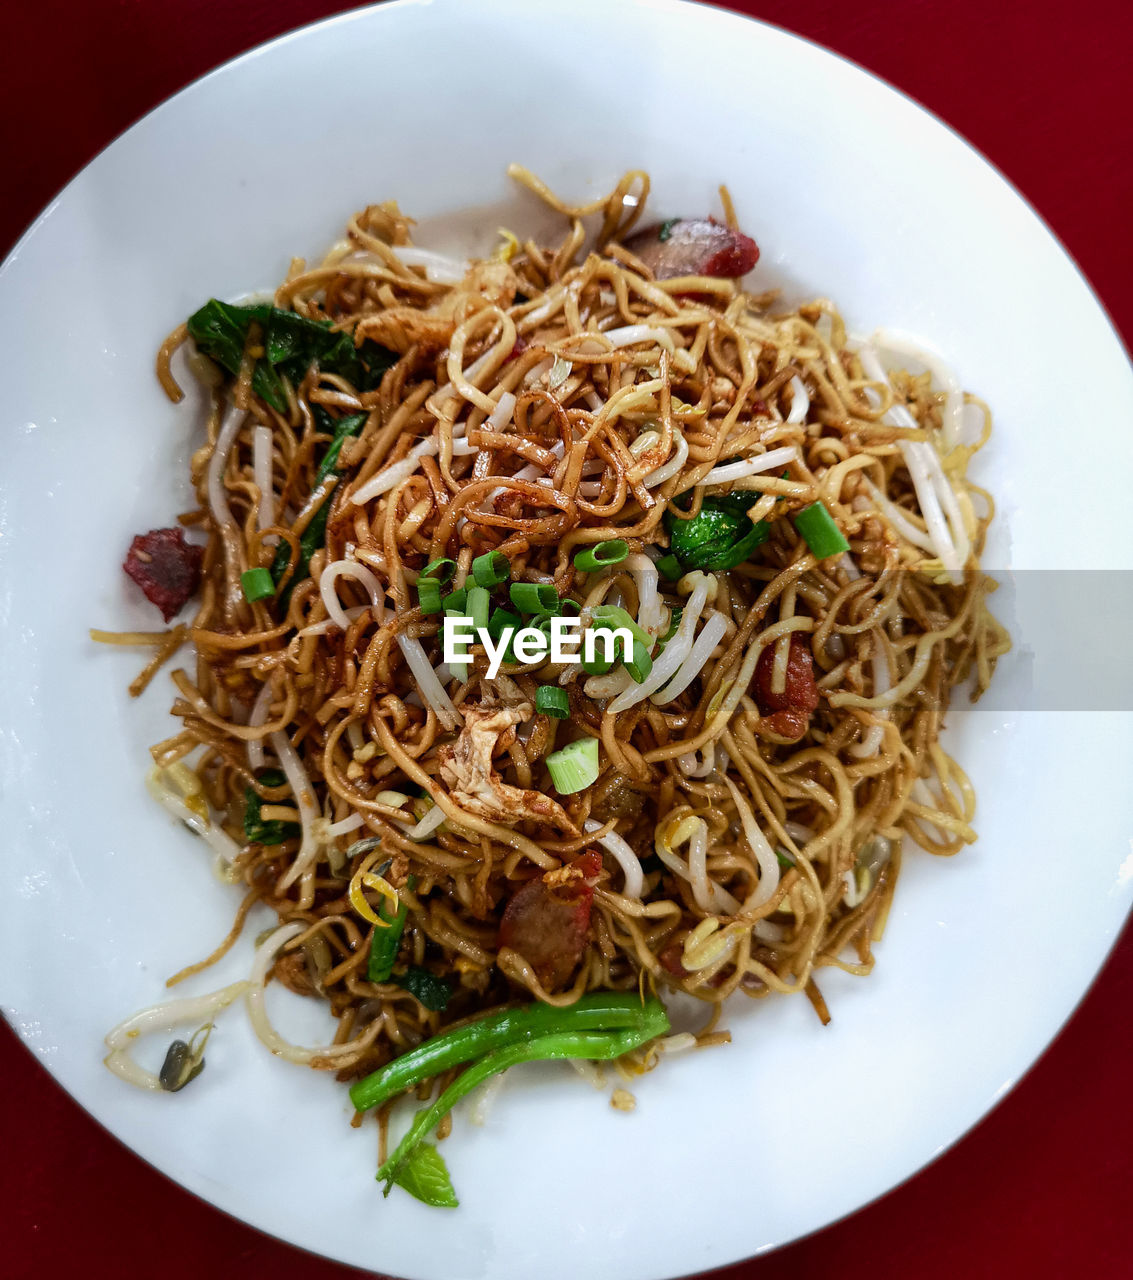 food and drink, food, fried noodles, chow mein, pasta, italian food, dish, plate, healthy eating, noodle, wellbeing, chinese food, meal, thai food, freshness, lo mein, asian food, indoors, no people, cuisine, hokkien mee, vegetable, meat, bakmi, high angle view, pad thai, directly above, serving size, stir-fried, produce, fried, close-up, table, red, still life, savory food, business